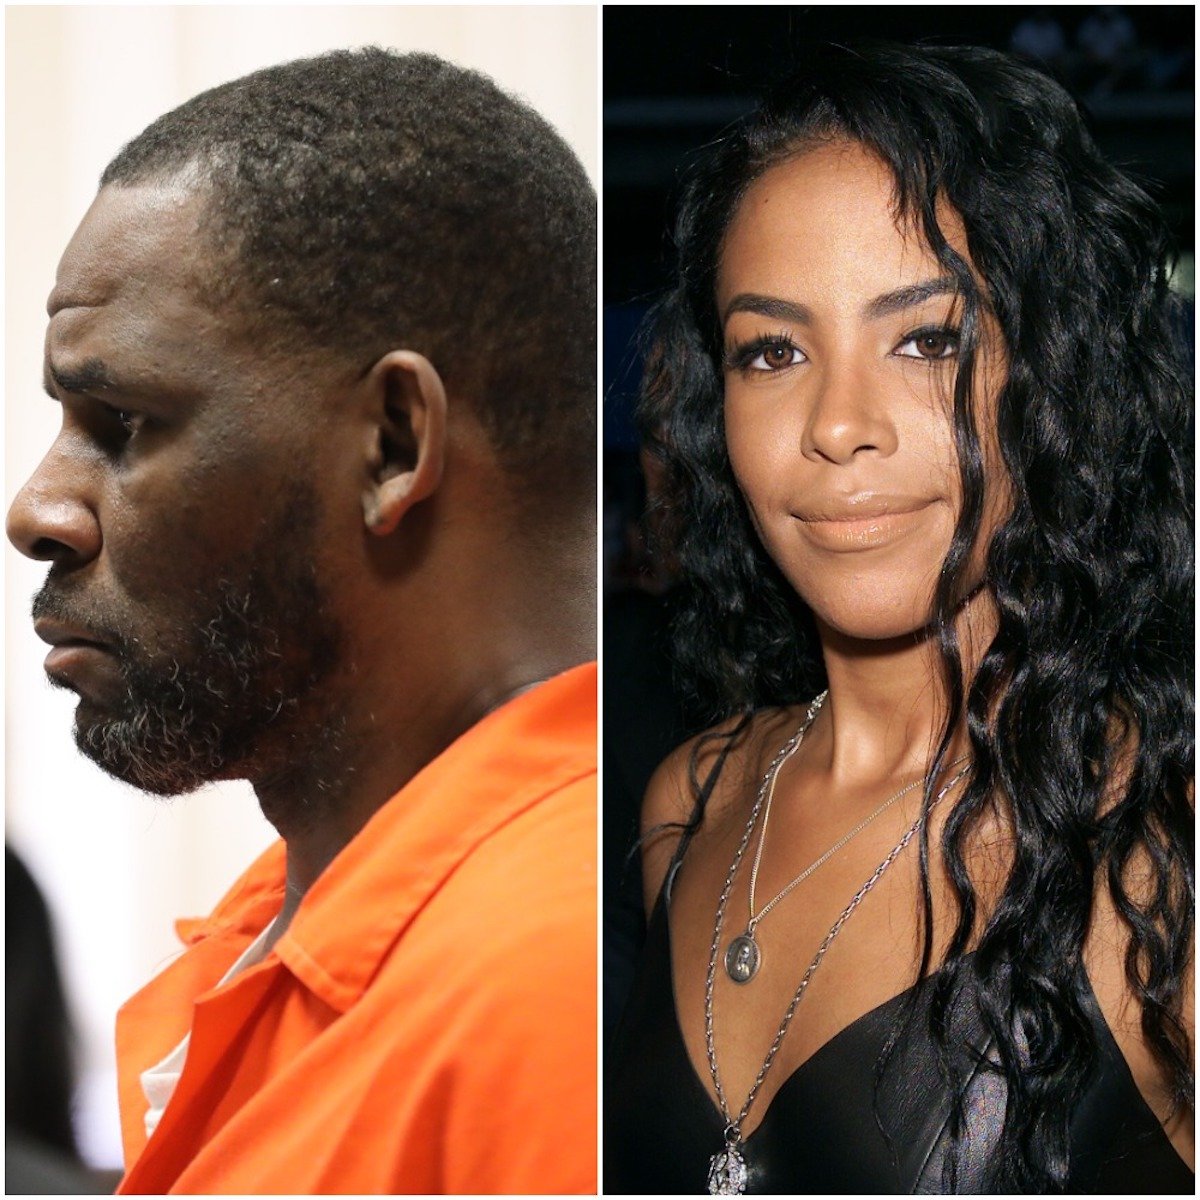 R Kellys Legal Team Admits To His Relationship With Aaliyah As Part Of Defense Strategy During 